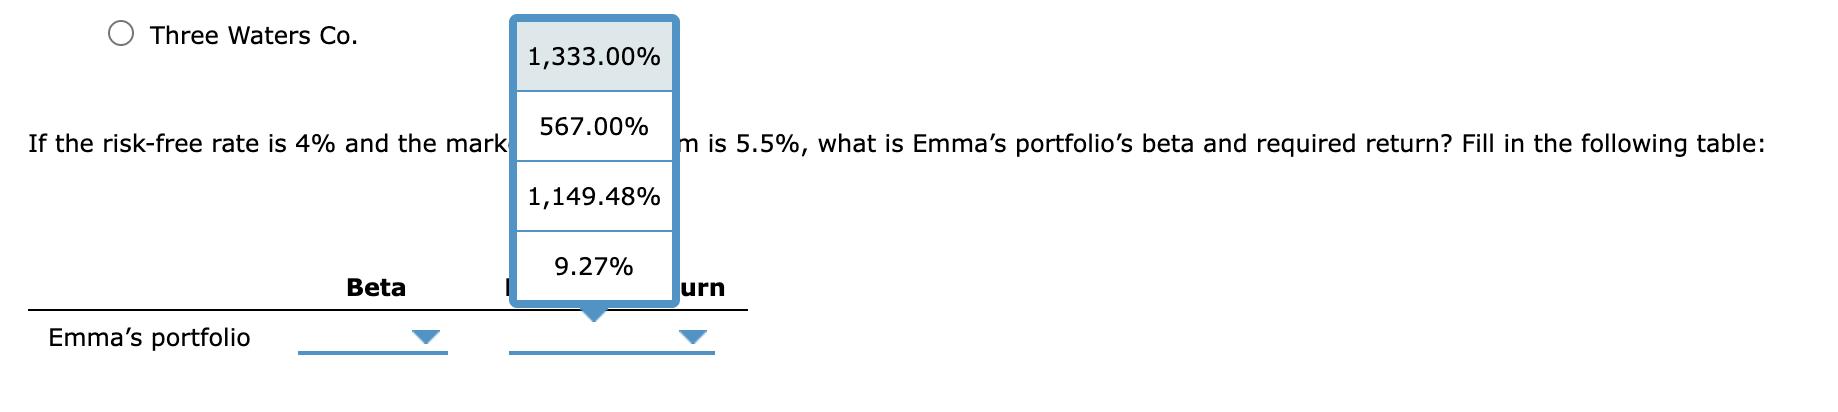 Three Waters Co. 1,333.00% 567.00% If the risk-free rate is 4% and the mark m is 5.5%, what is Emmas portfolios beta and re